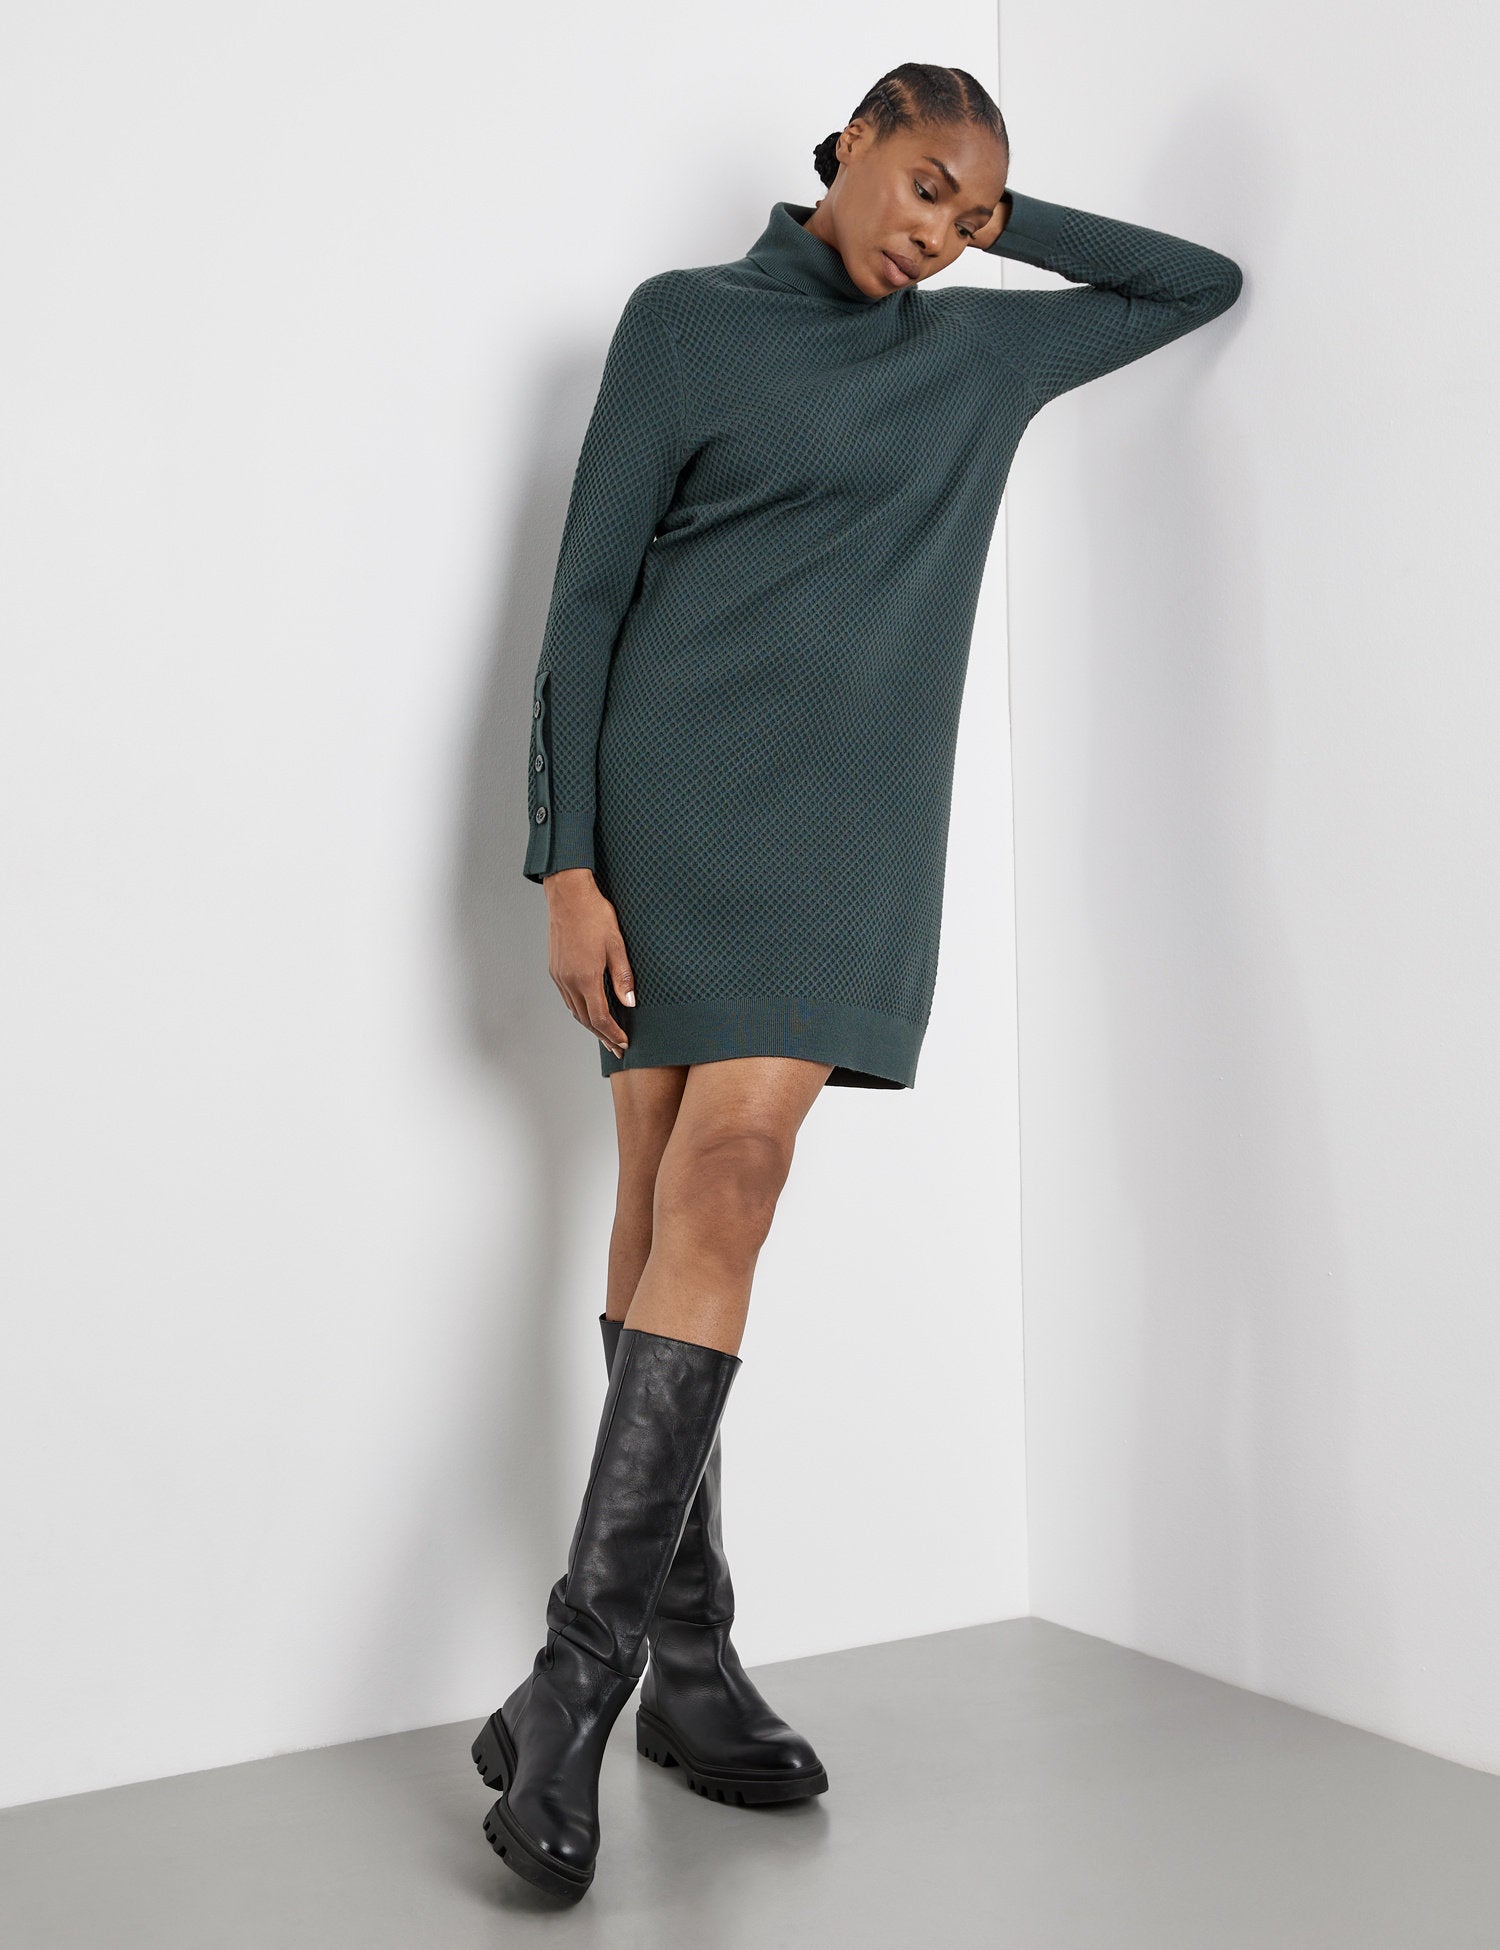 Knit Dress With A Polo Collar And A Button Detail On The Sleeves_280106-35713_50939_05